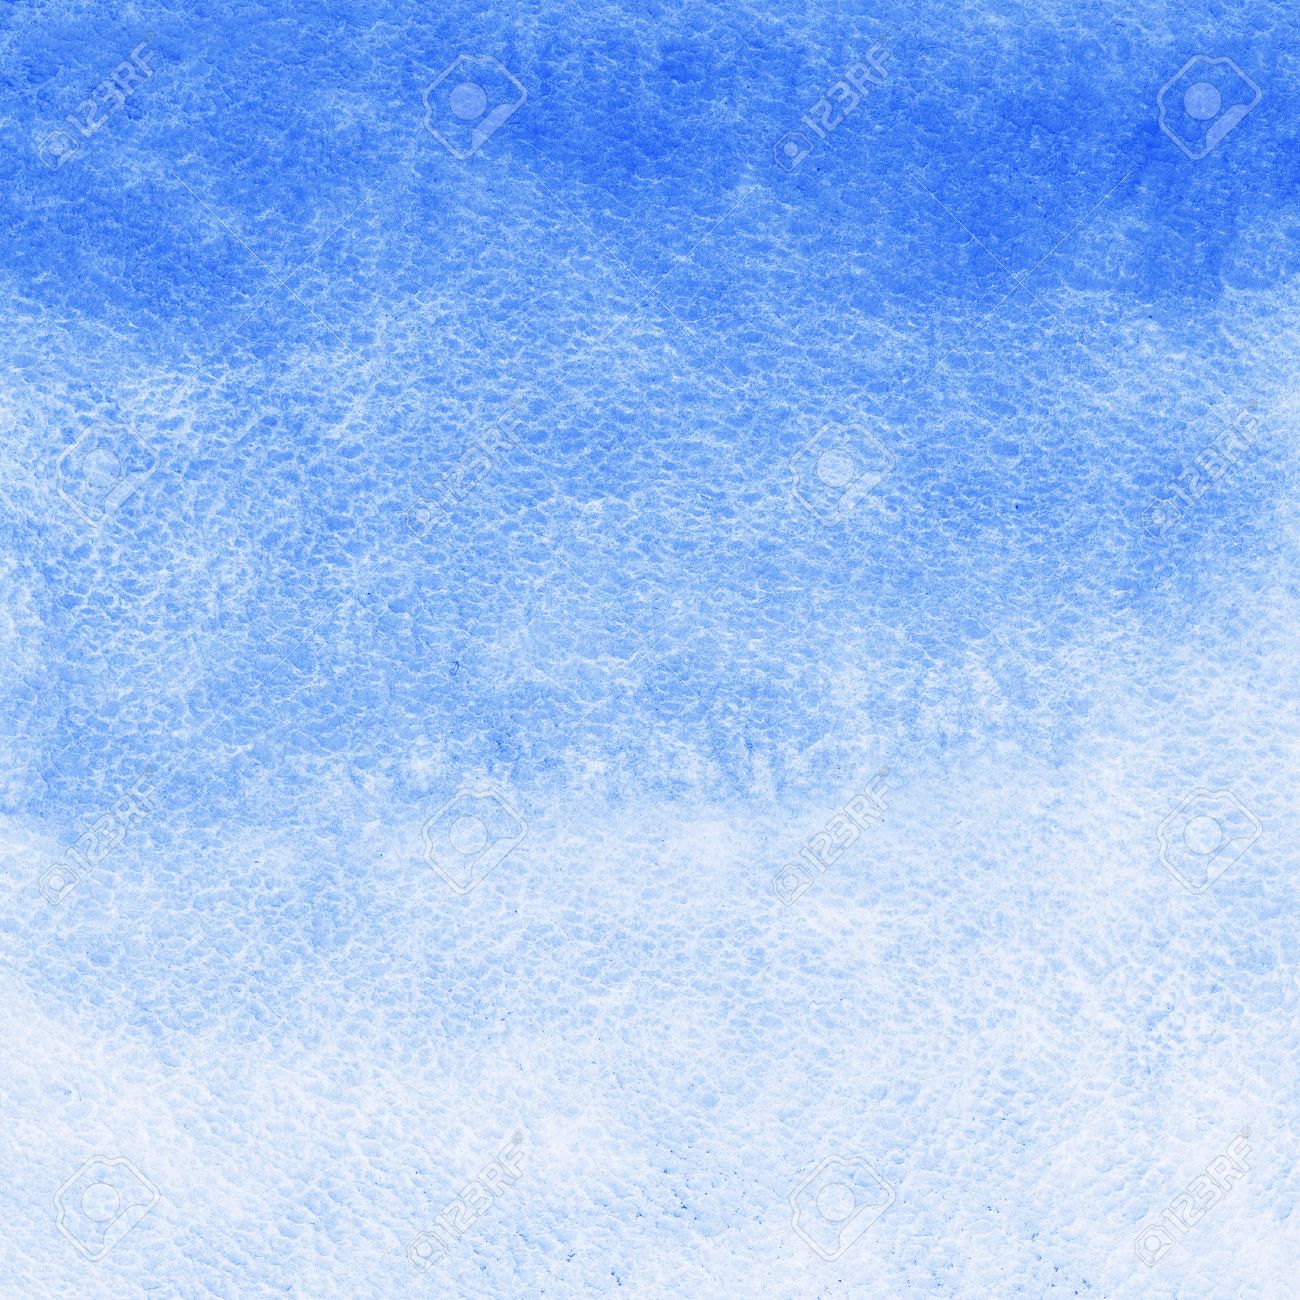 Cobalt Pastel Blue Watercolor Abstract Background Gradient Fill